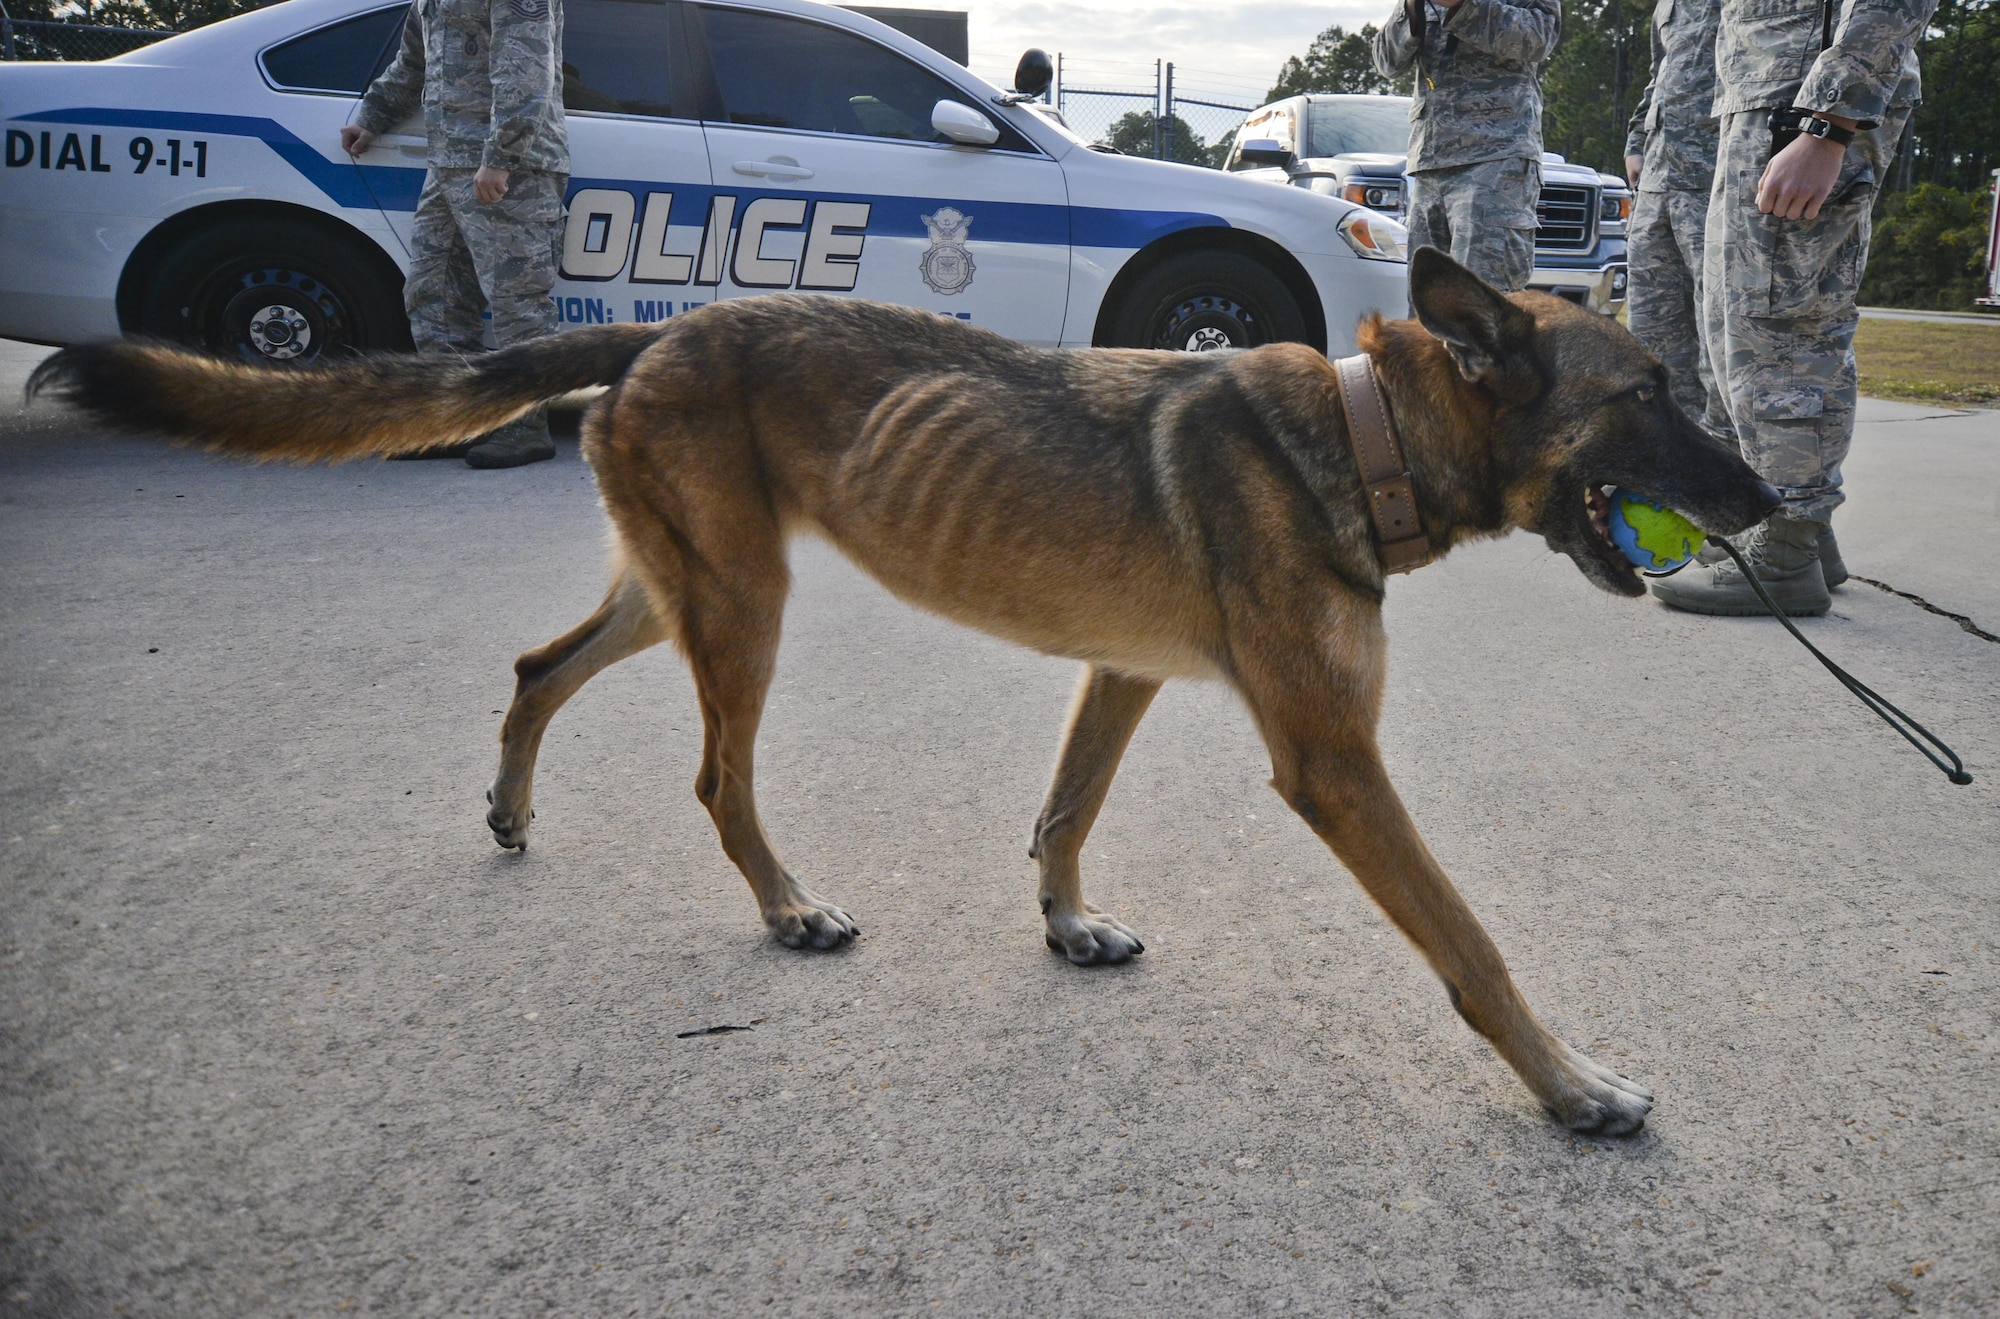 Retired U.S. Air Force Military Working Dog, Mica T204, carries a toy while waiting for her final patrol to begin Nov. 14, 2016 at Tyndall Air Force Base. Mica was diagnosed with an aggressive cancer and was retired from service in February 2016. Major Mari Metzler, 325th Aerospace Medical Squadron aerospace physiology flight commander, adopted Mica after she was released from the MWD section. (U.S. Air Force photo by Tech. Sgt. Javier Cruz/Released)